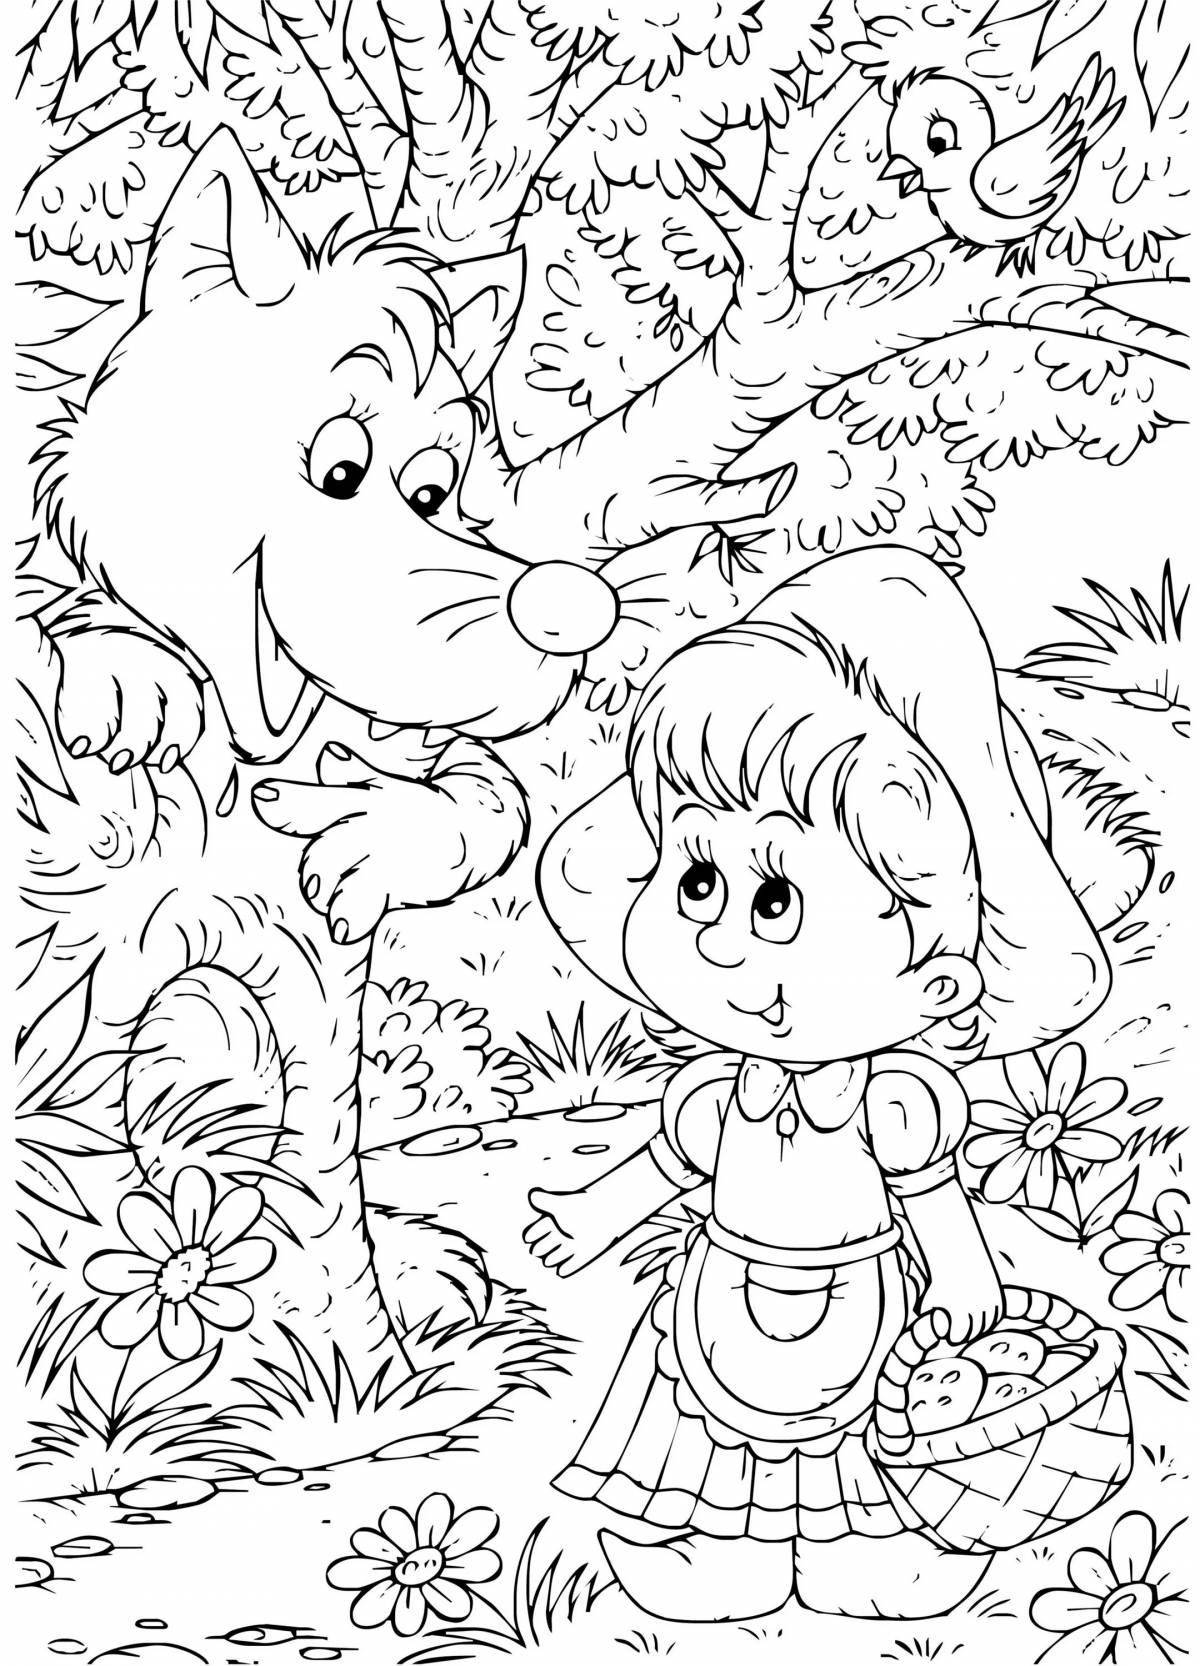 Colouring awesome gray wolf and little red riding hood